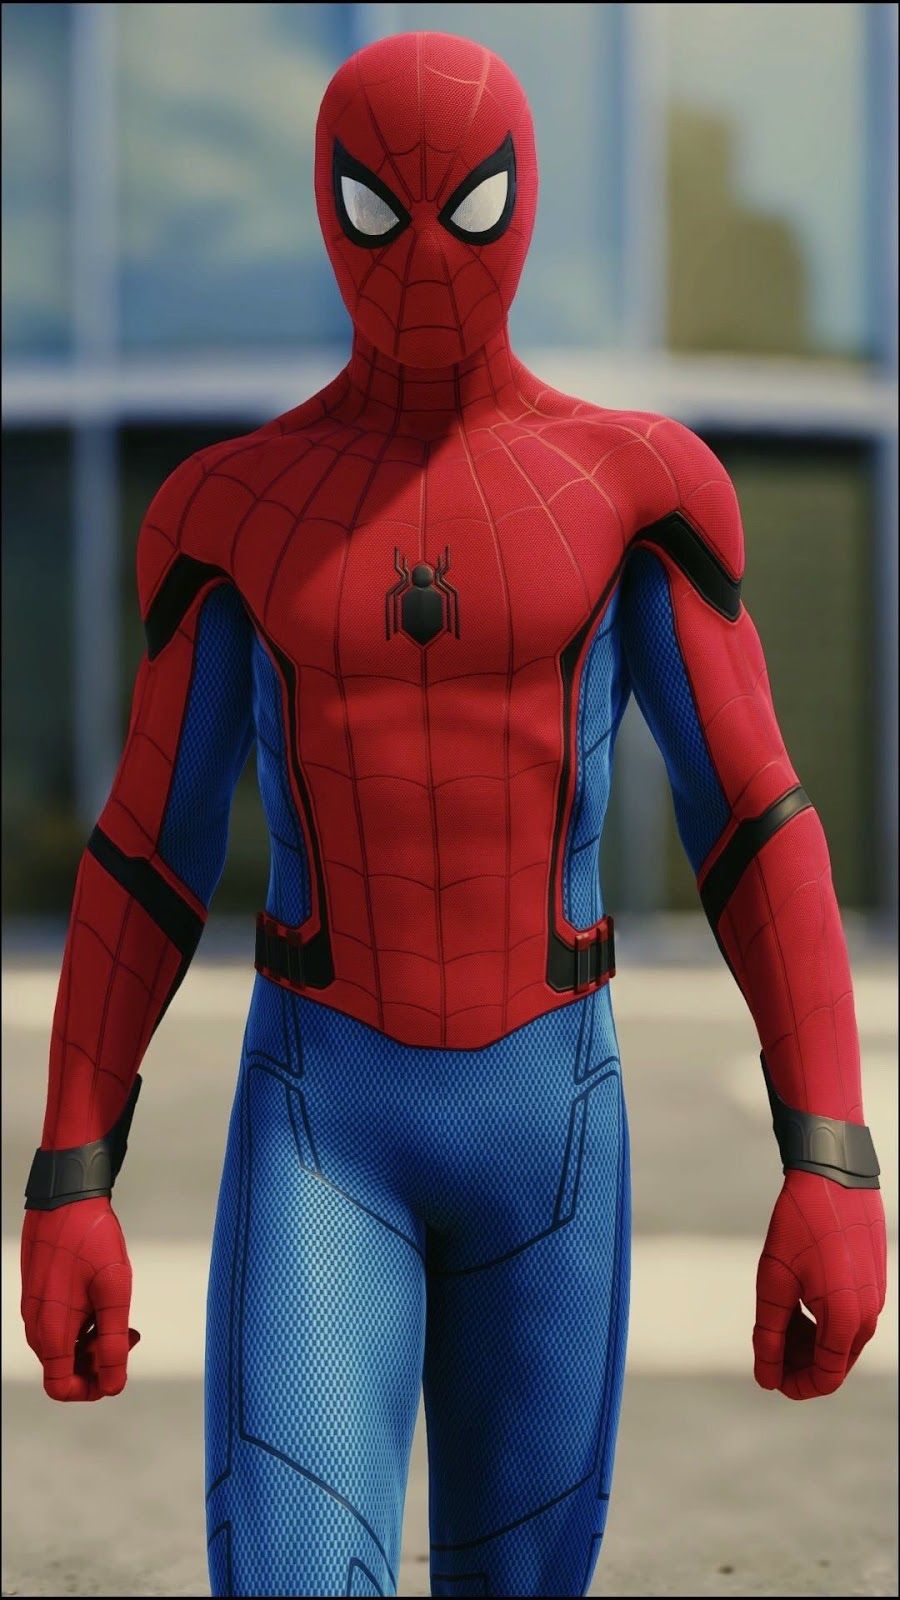 The Best Spiderman Wallpaper for your Smartphone Taken from In Game Photo. In Game Photography